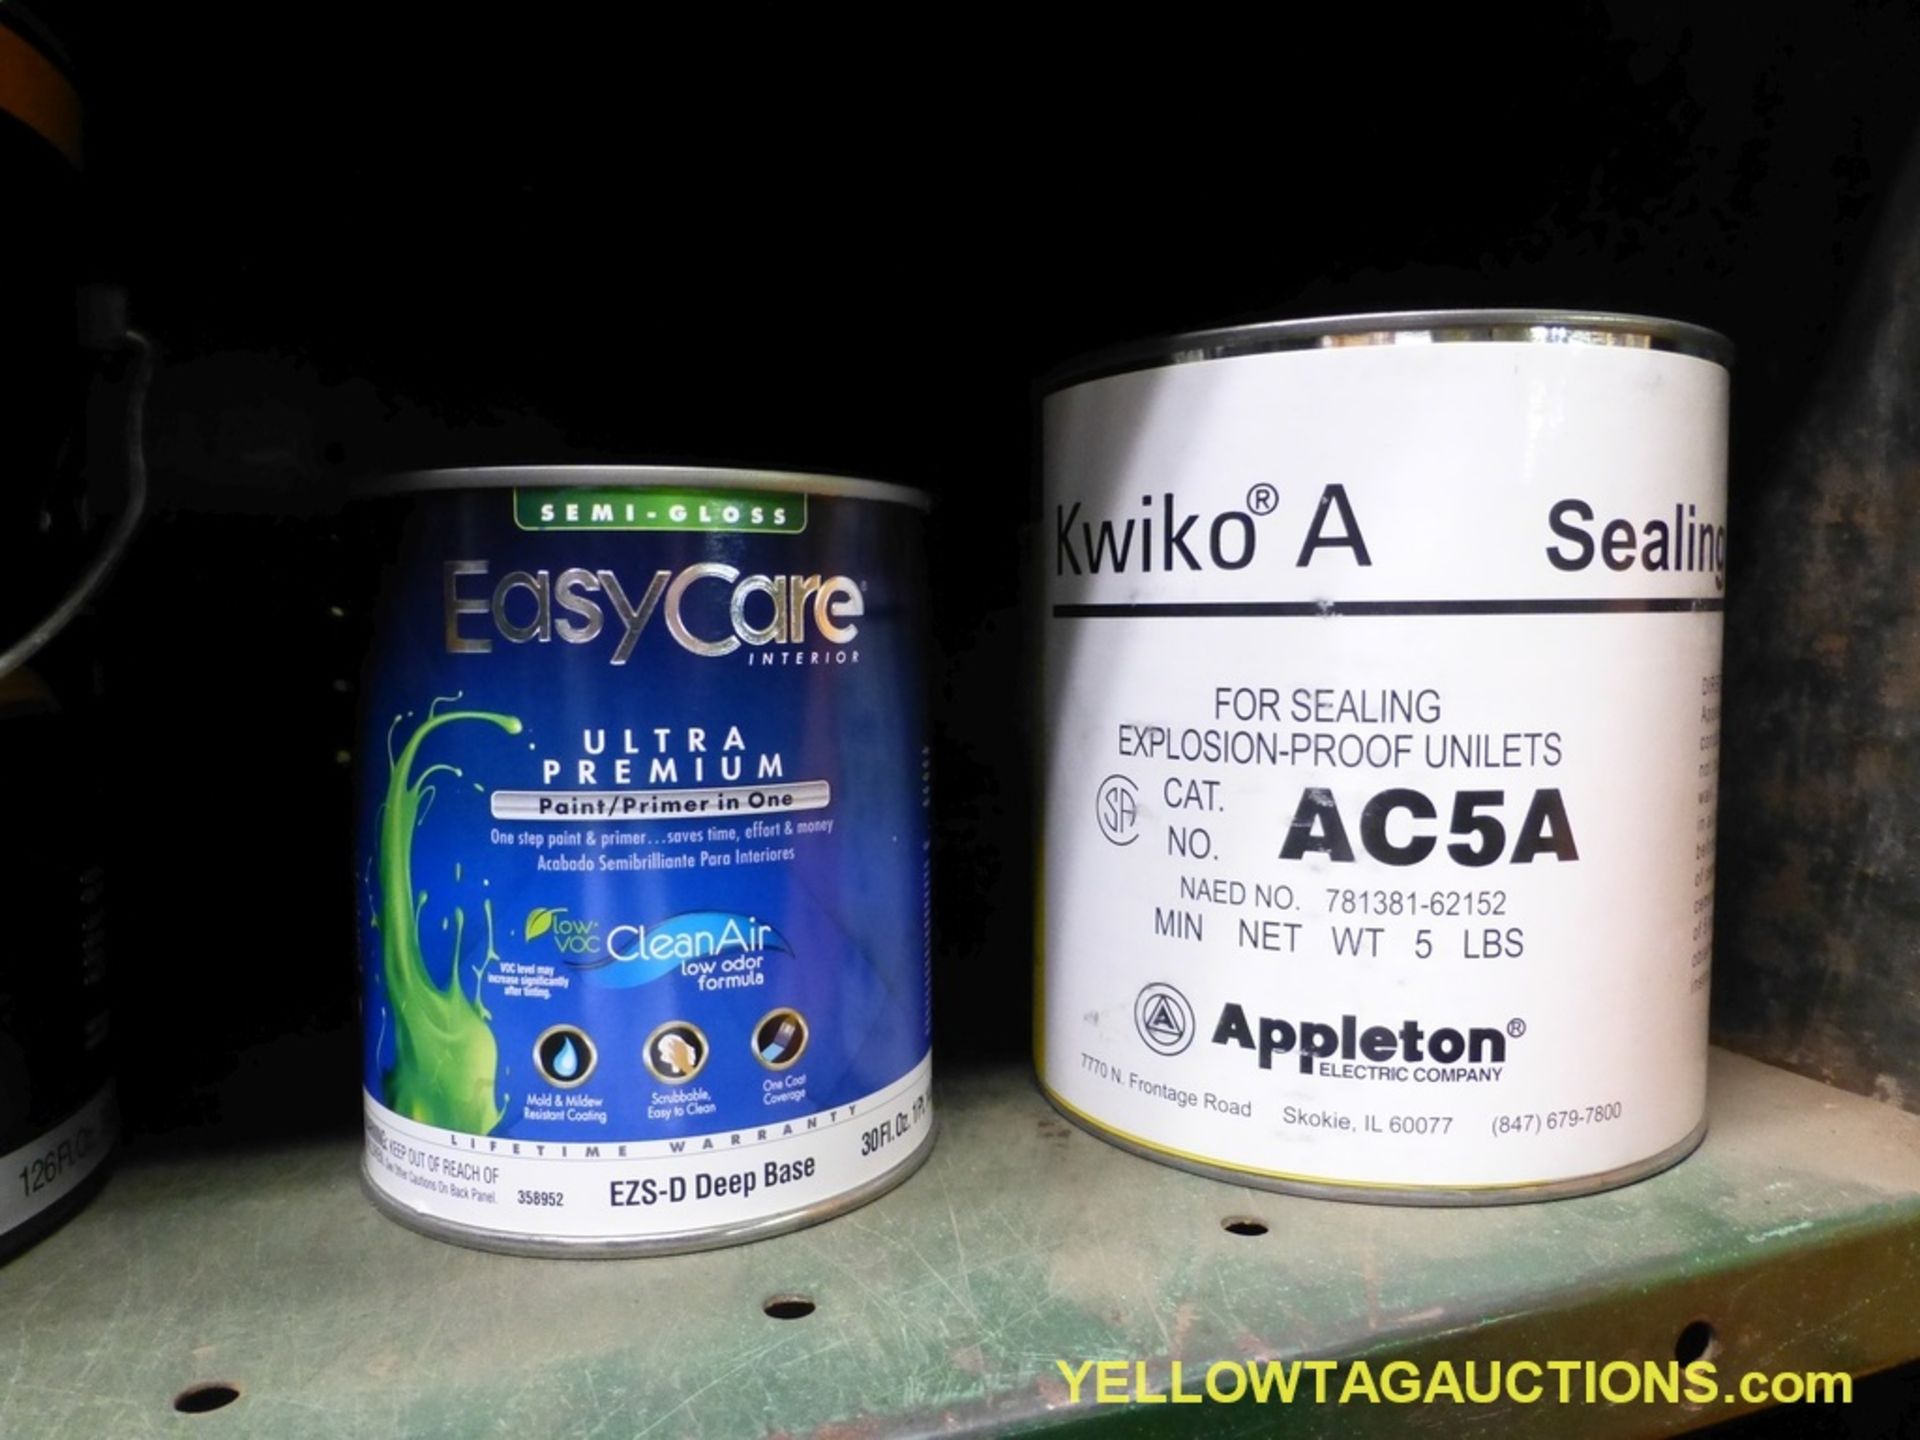 Shelves w/Contents | Includees:; Easy Care Paint; Kwiko Sealing Cement Asbestos Free; Pneumatic Pump - Image 3 of 12